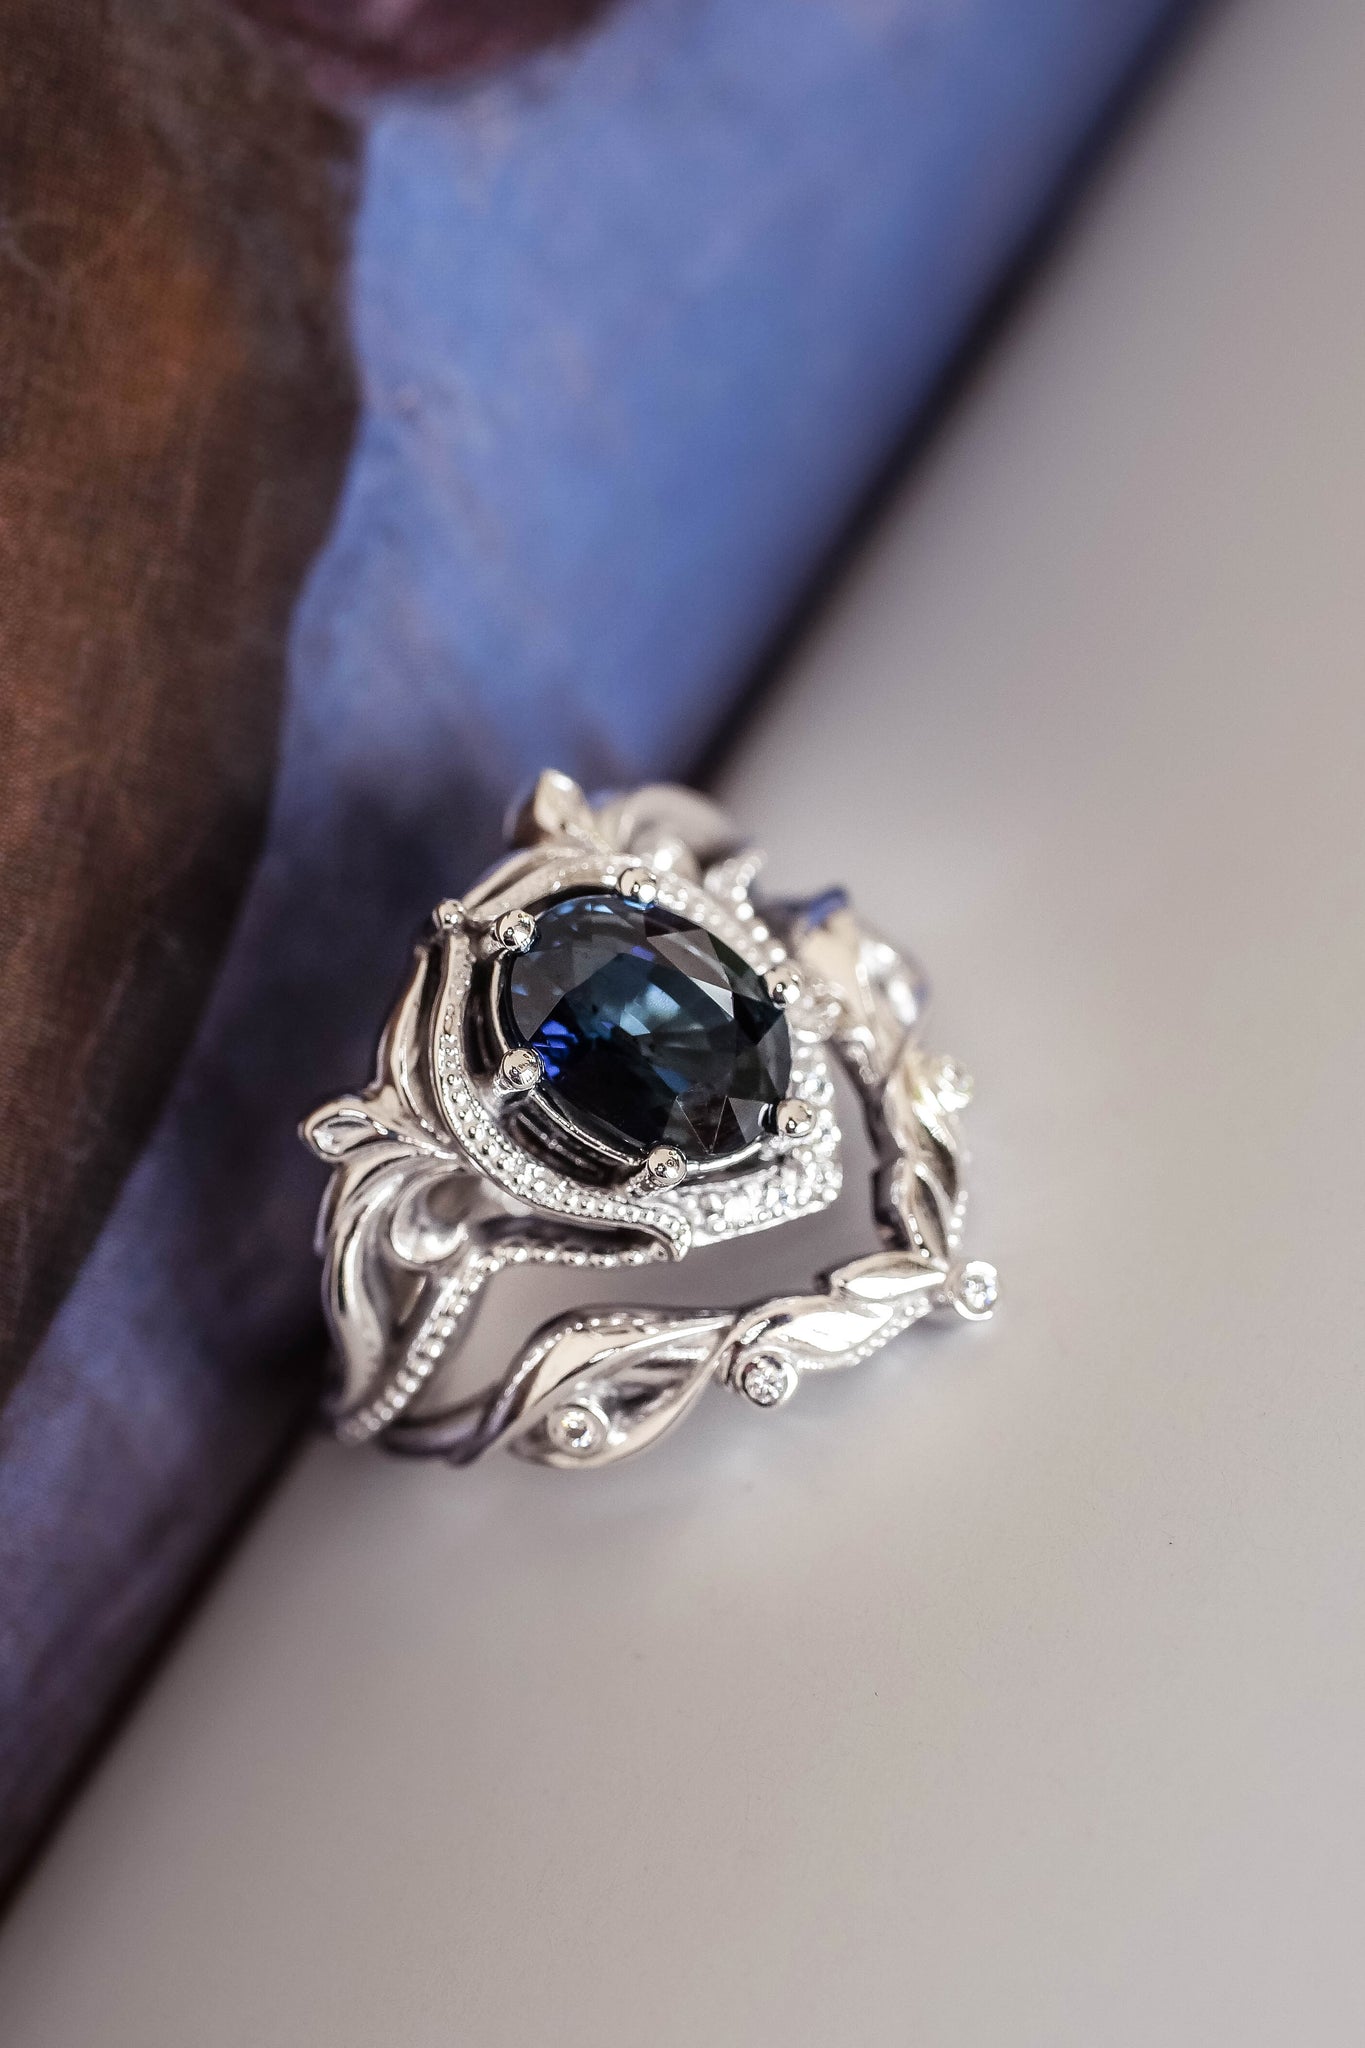 Art nouveau bridal ring set with natural sapphire / Lida oval - Eden Garden Jewelry™